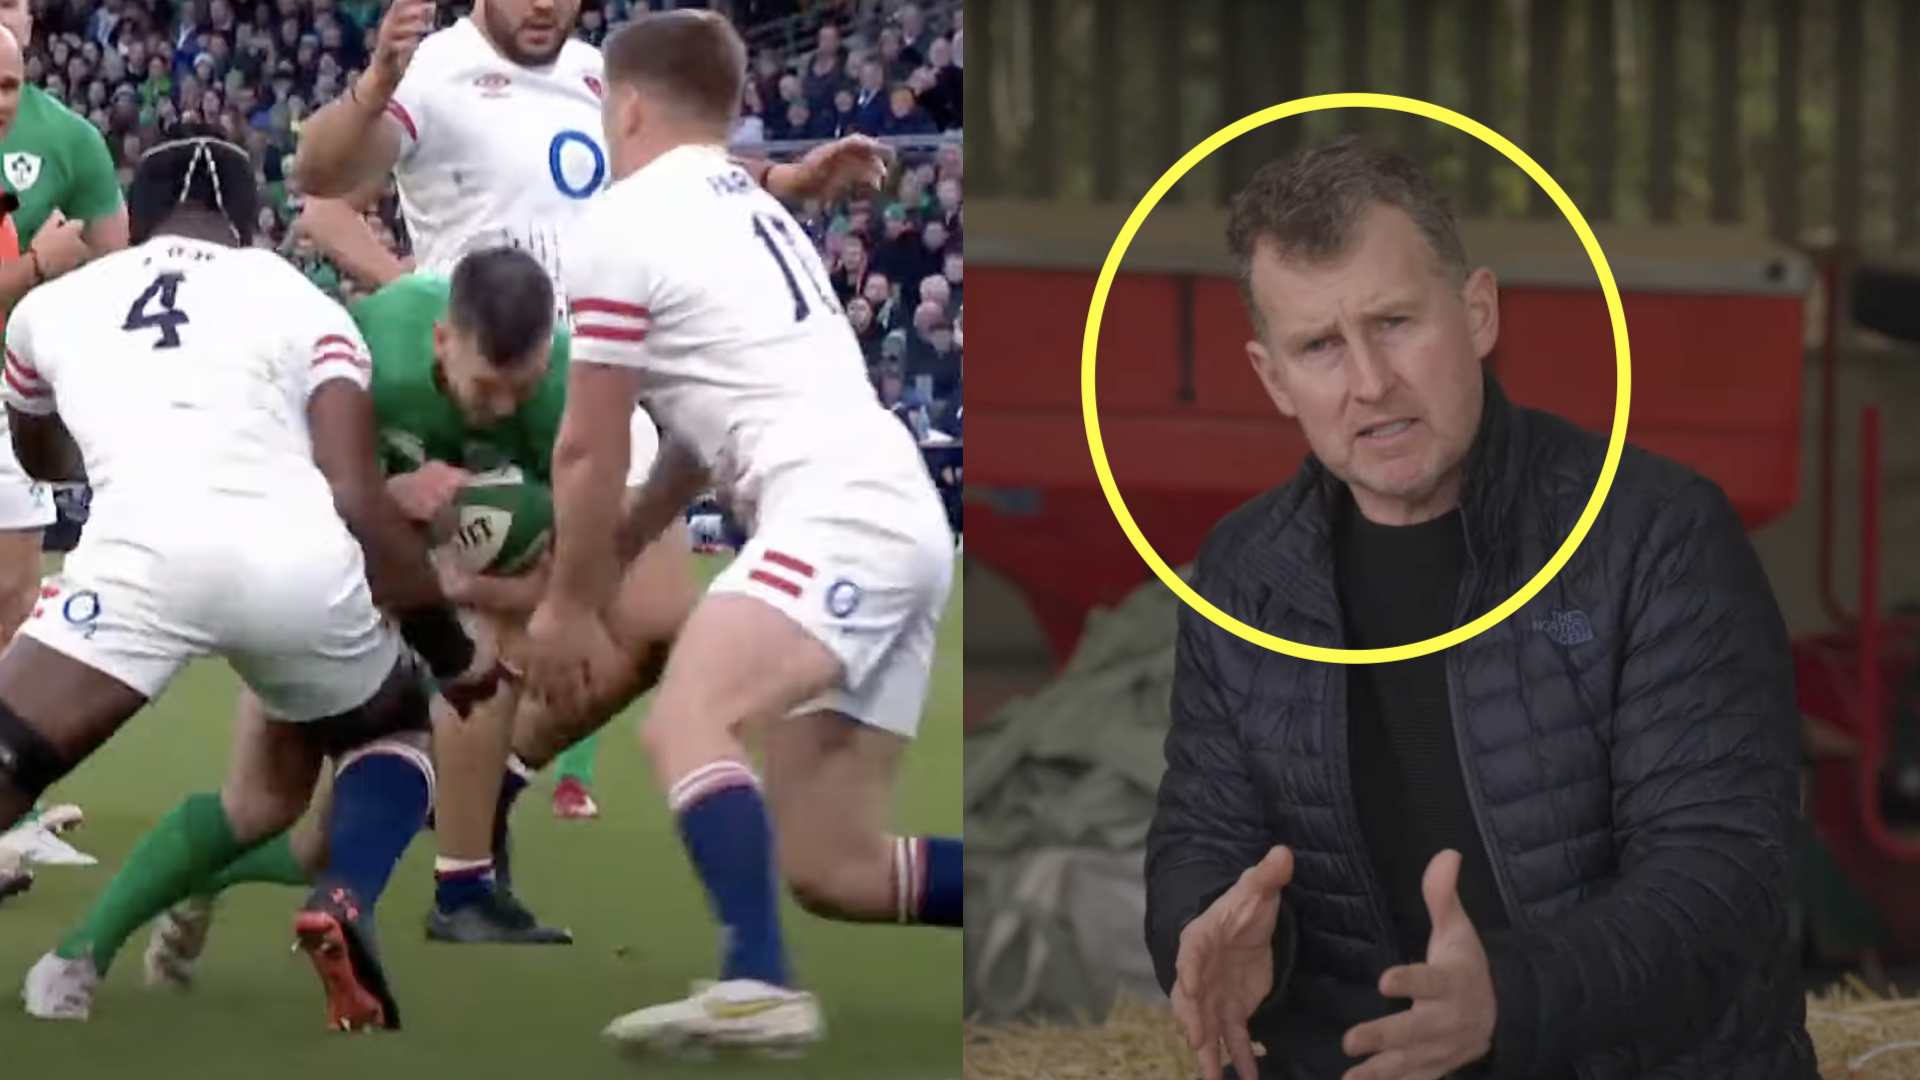 Nigel Owens explains why Owen Farrell and Maro Itoje are rugby geniuses